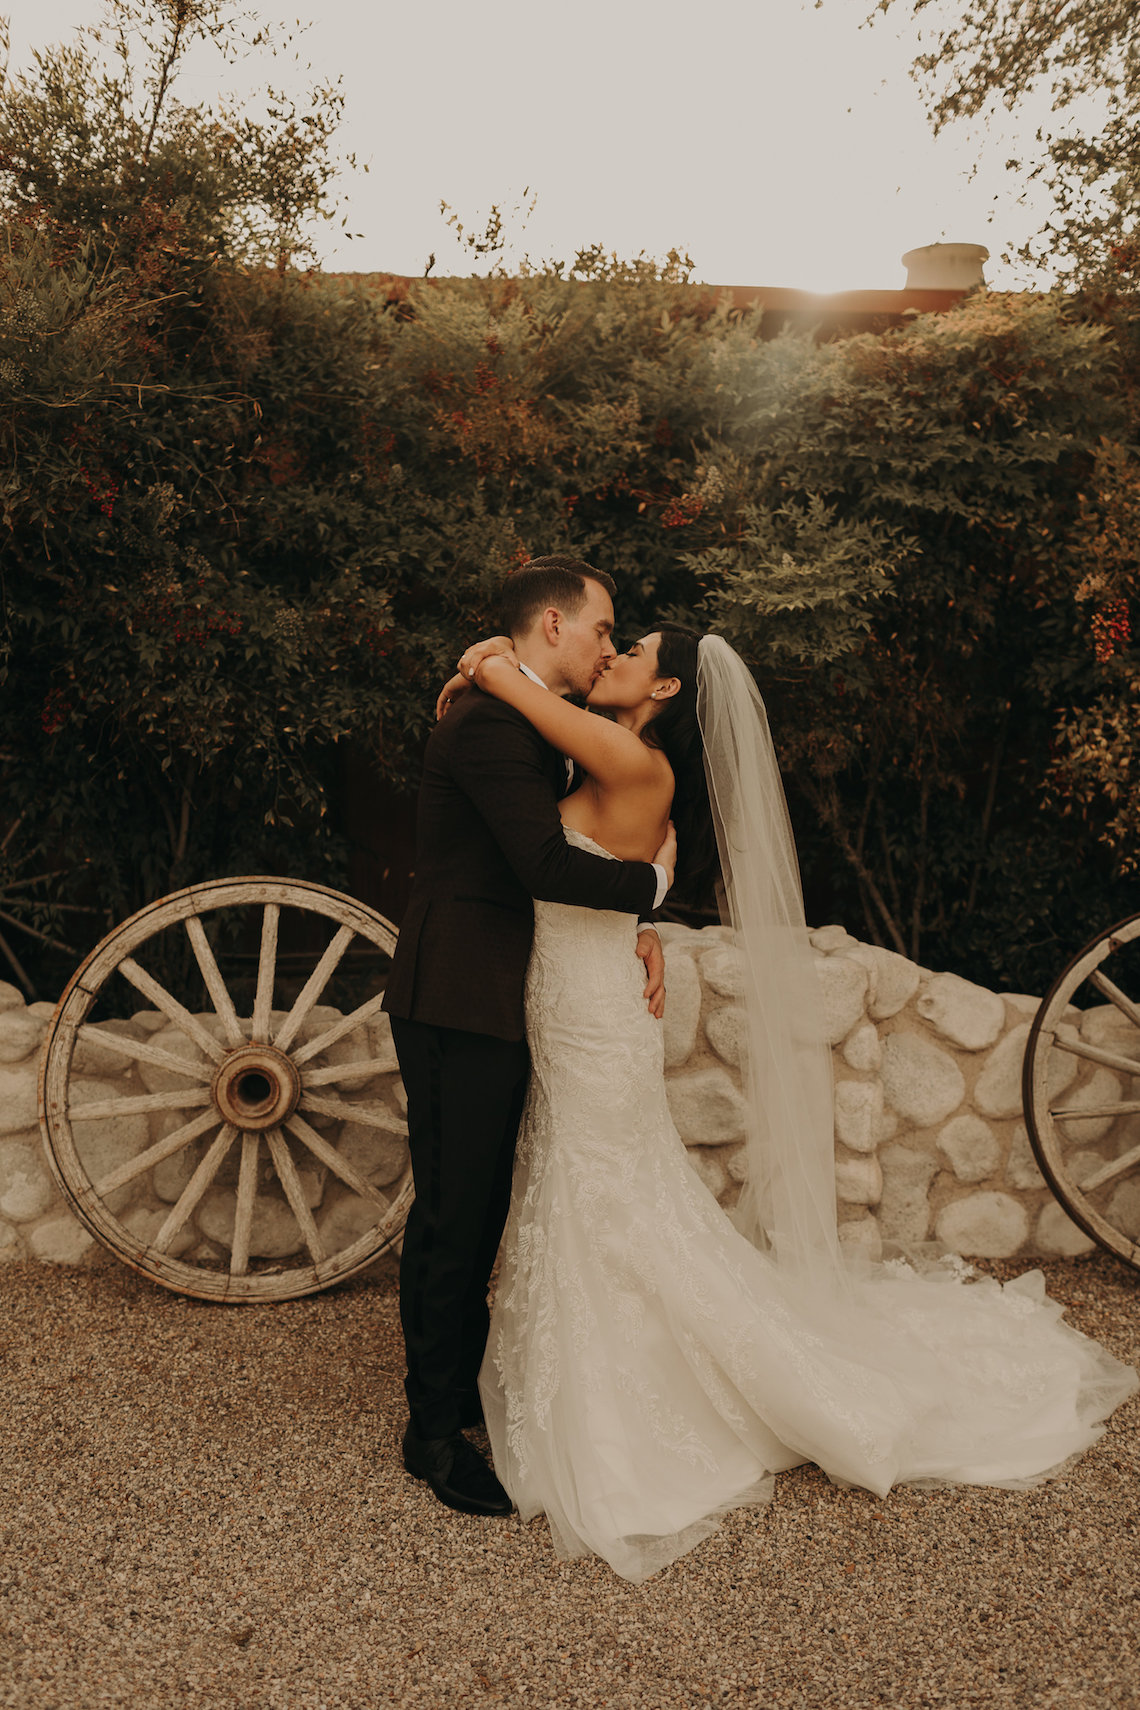 View More: http://thelightandthelove.pass.us/hernandez-wedding